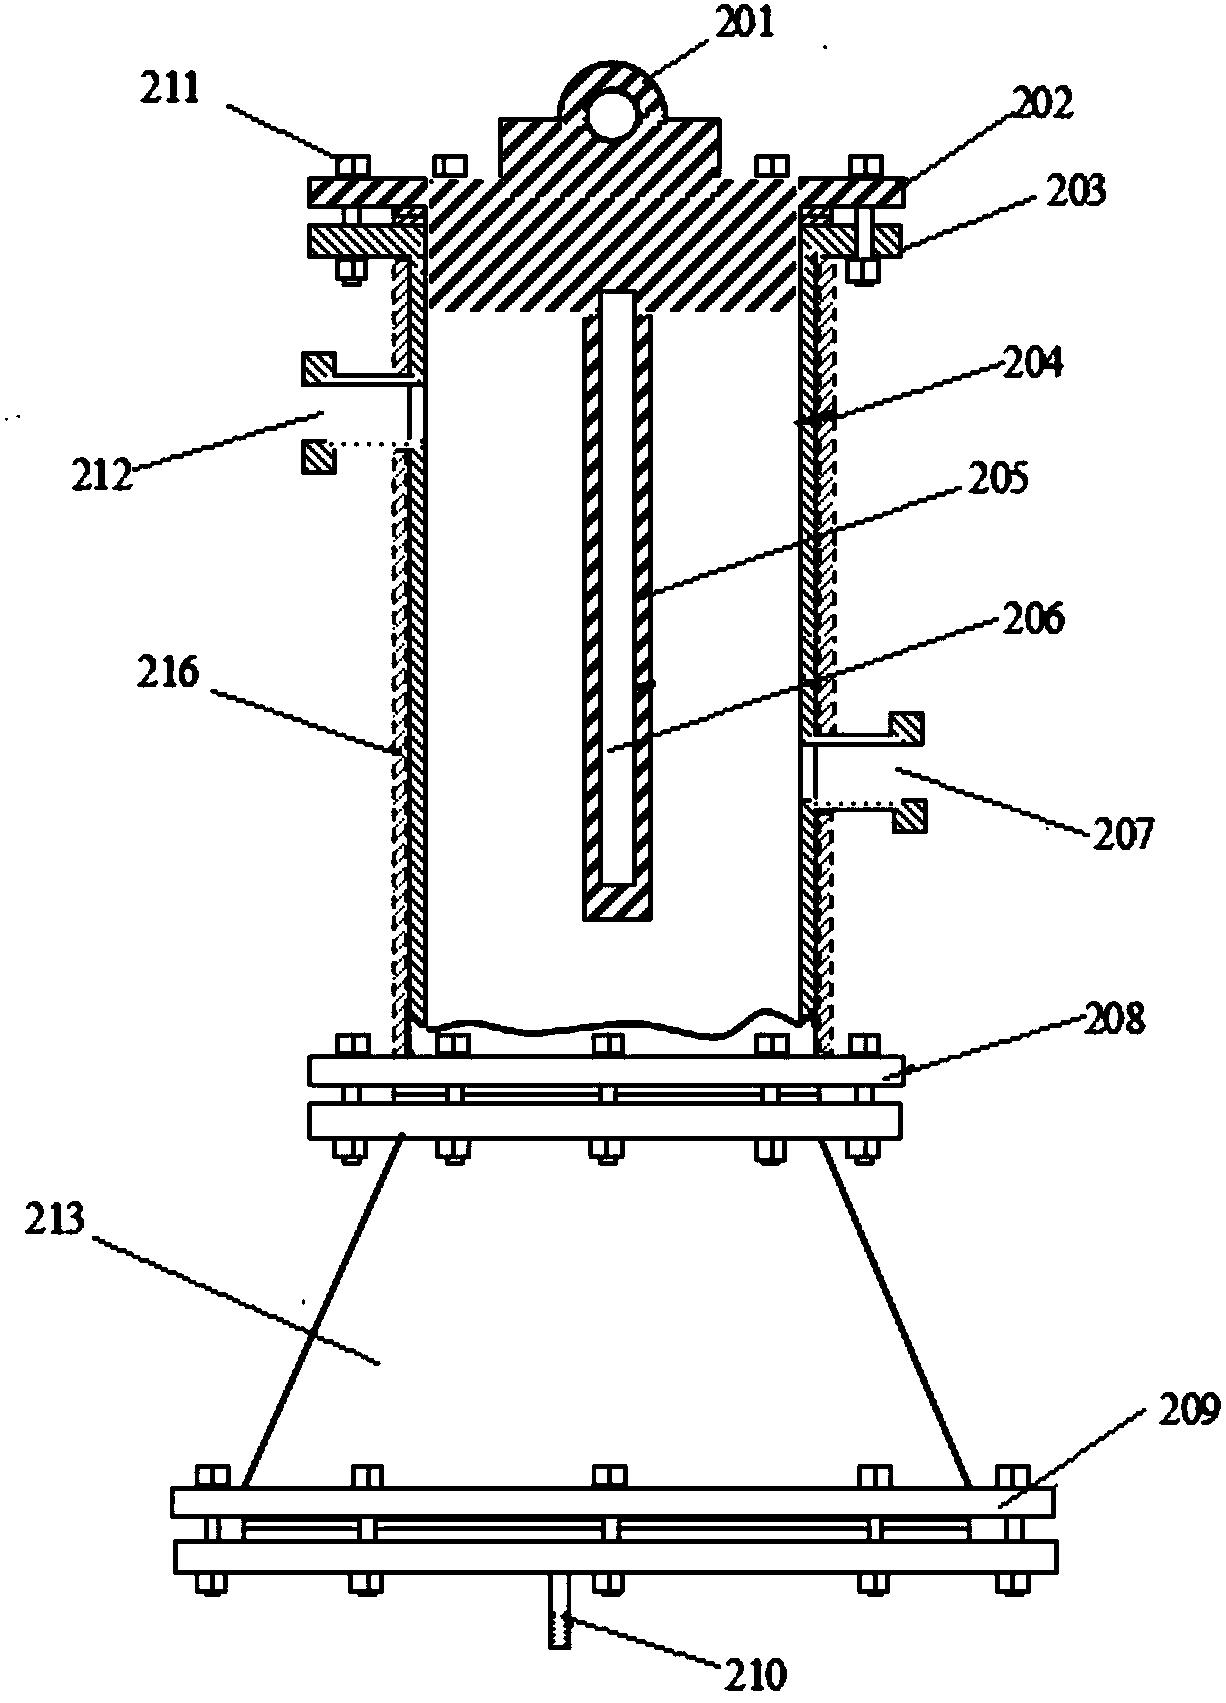 Negative pressure cleaning system for the cooler of the vacuum system of the auxiliary extruder of the film production line